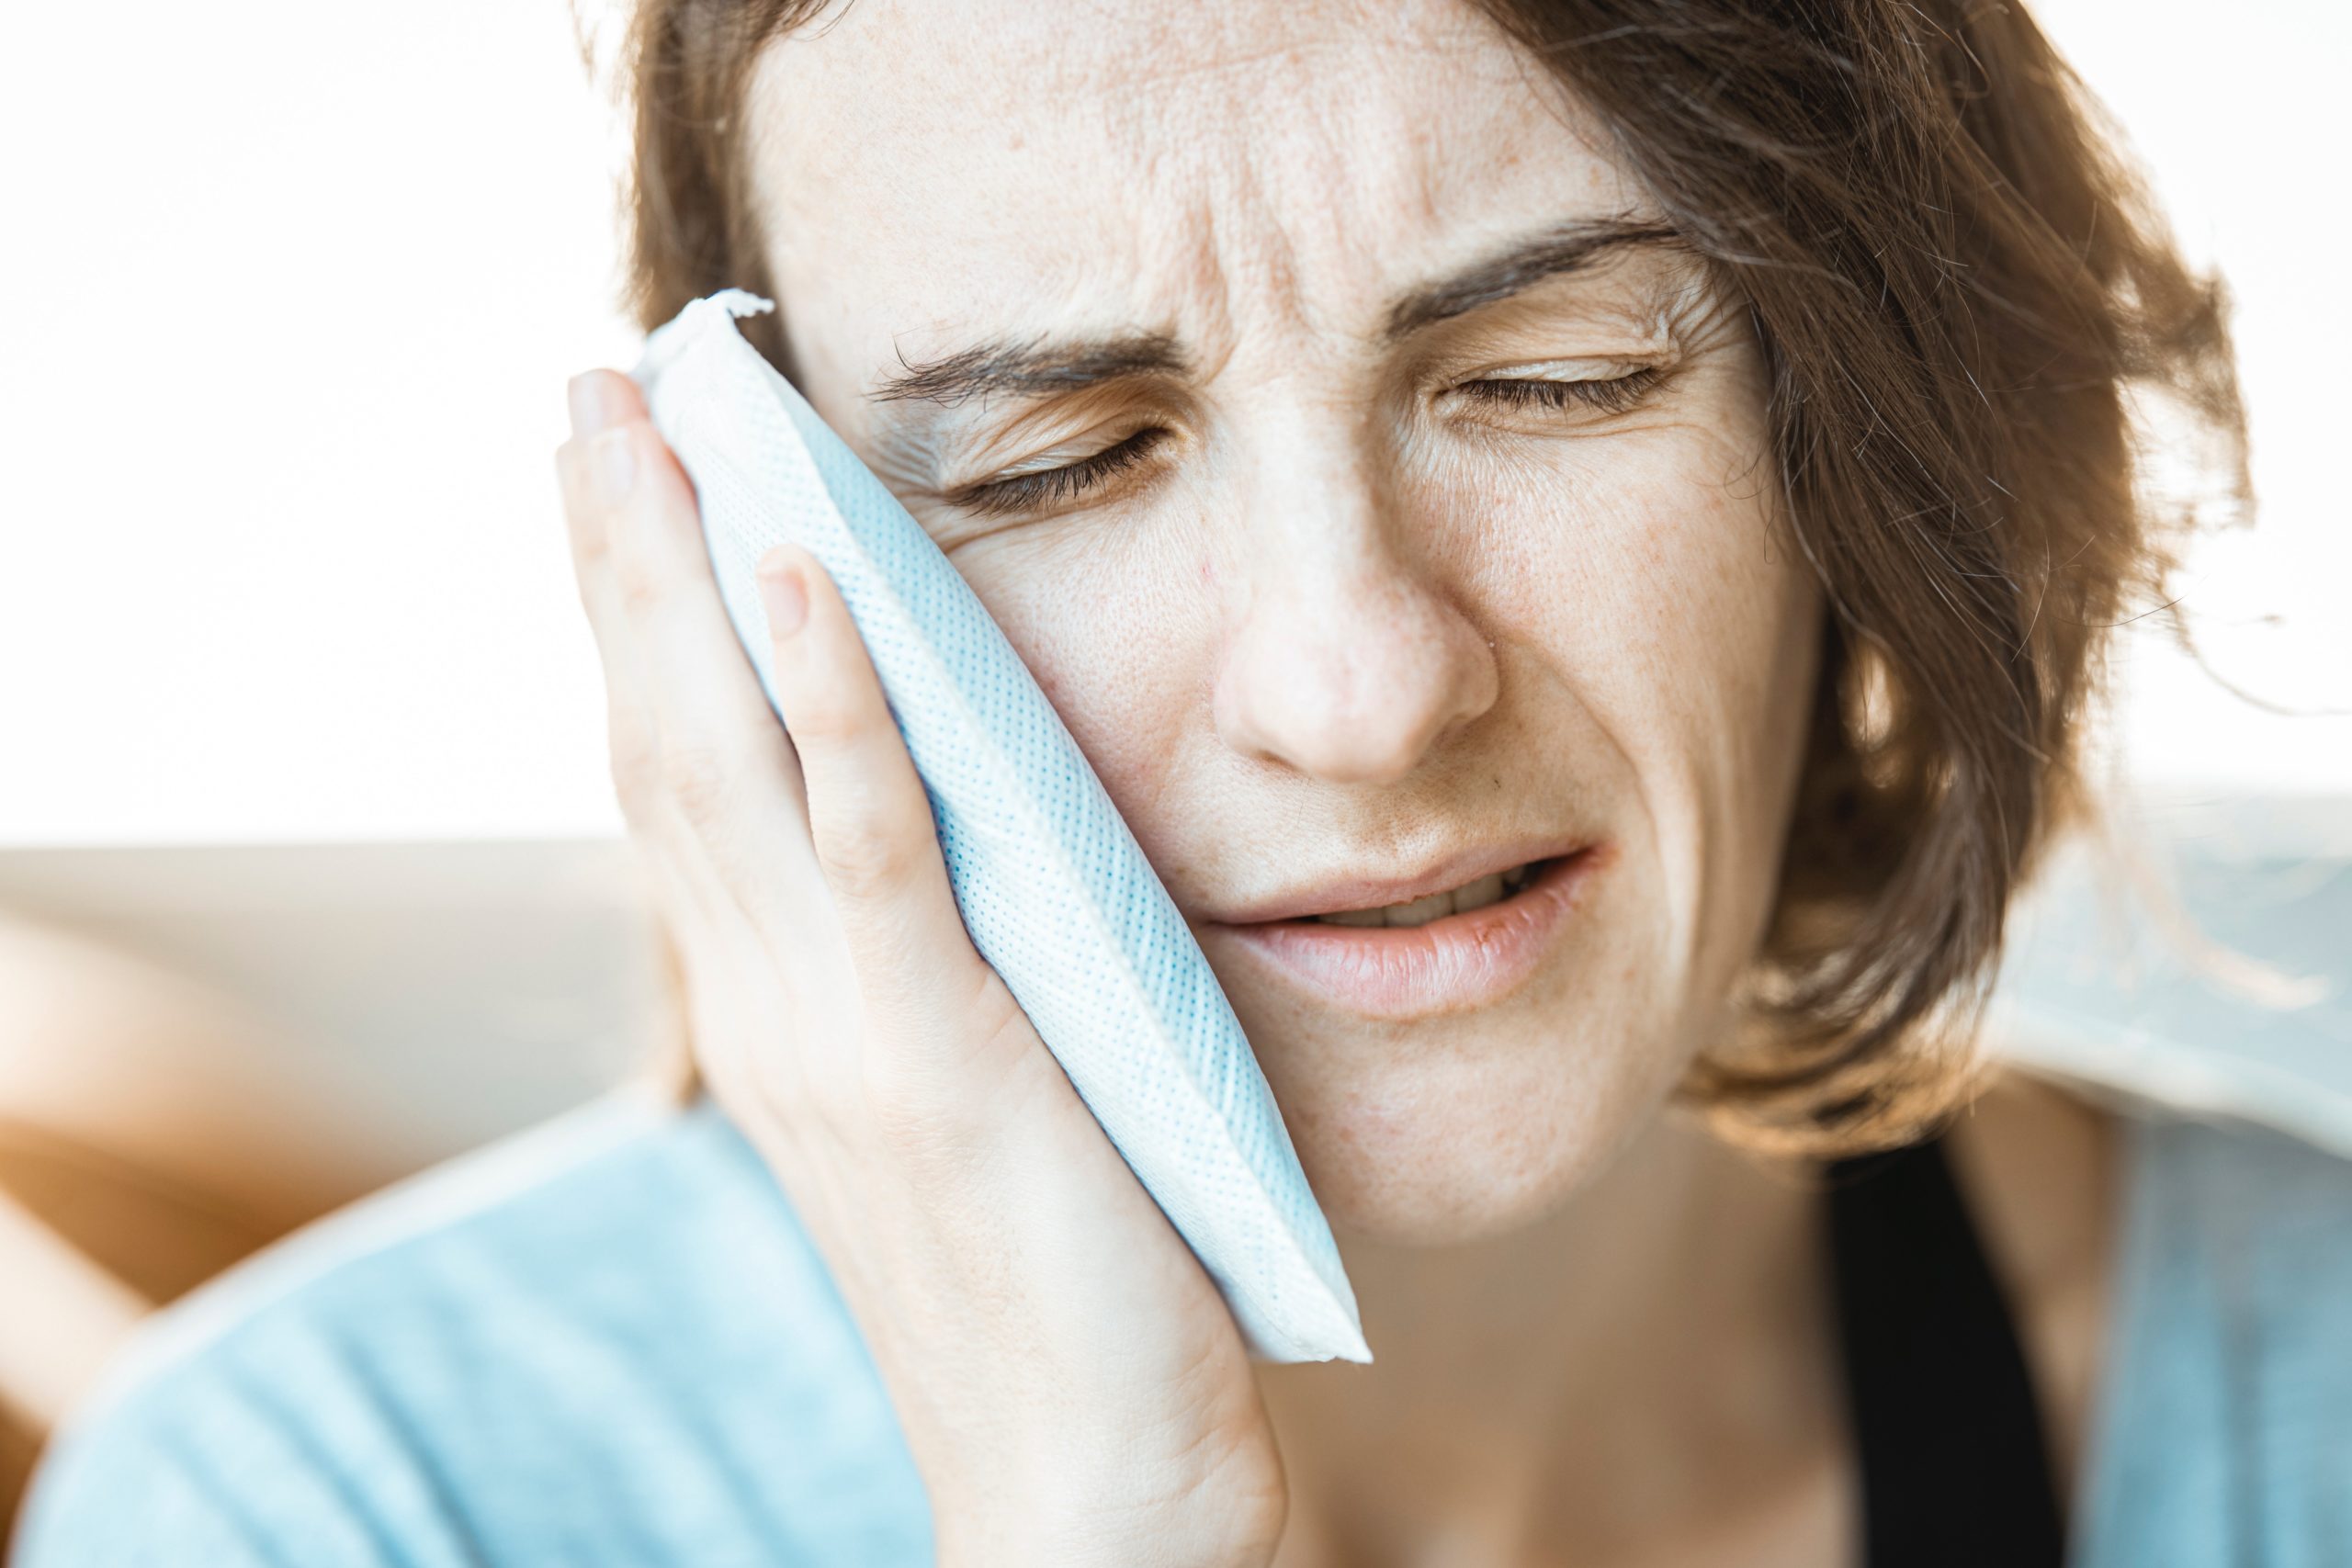 Wisdom Teeth Removal: What to Expect